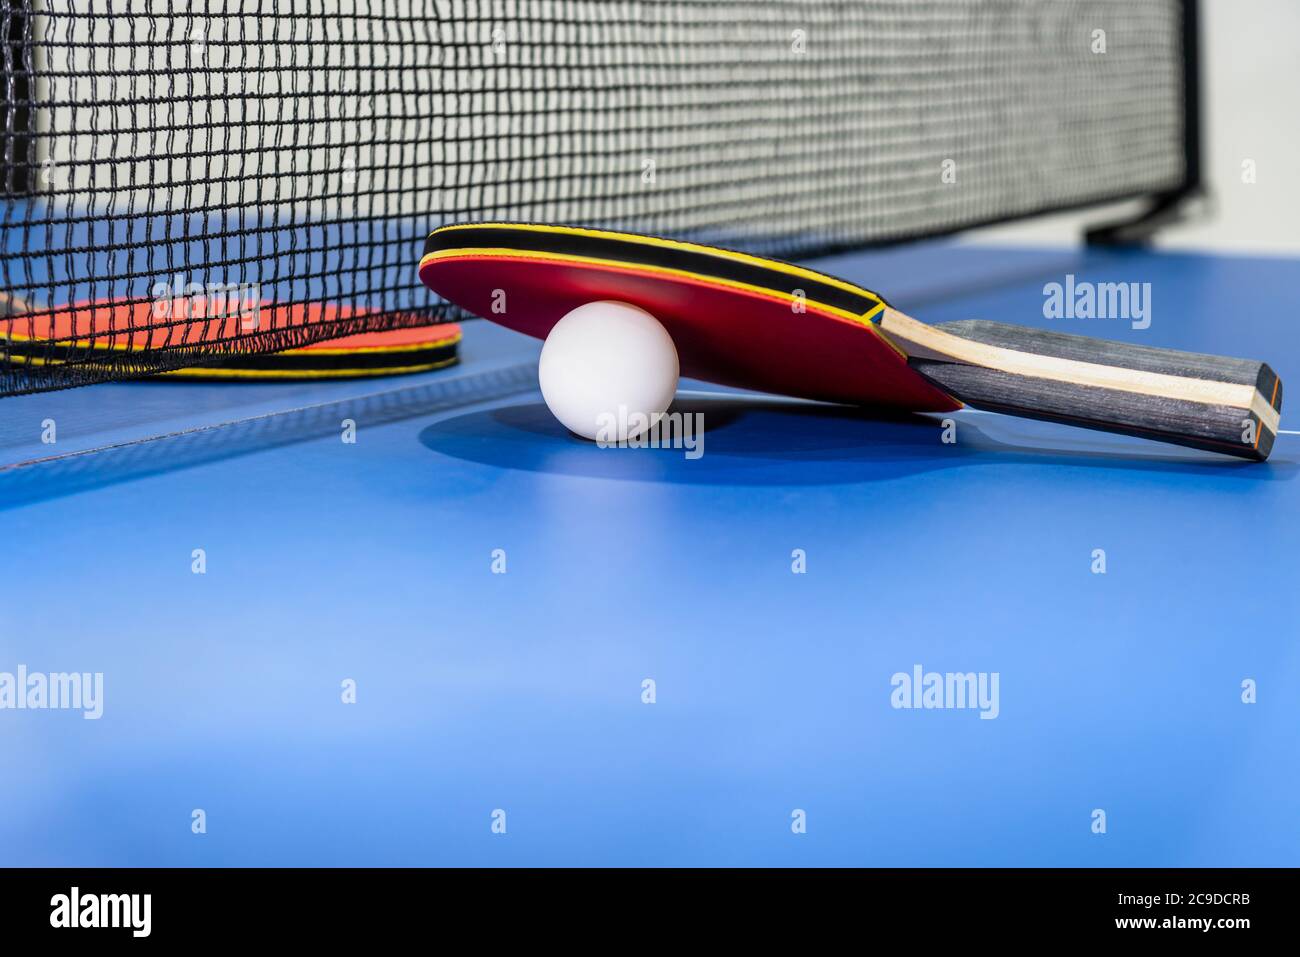 Red table tennis racket and a white ball on the blue ping pong table with a black net, Two table tennis paddle is a sports competition equipment indoo Stock Photo